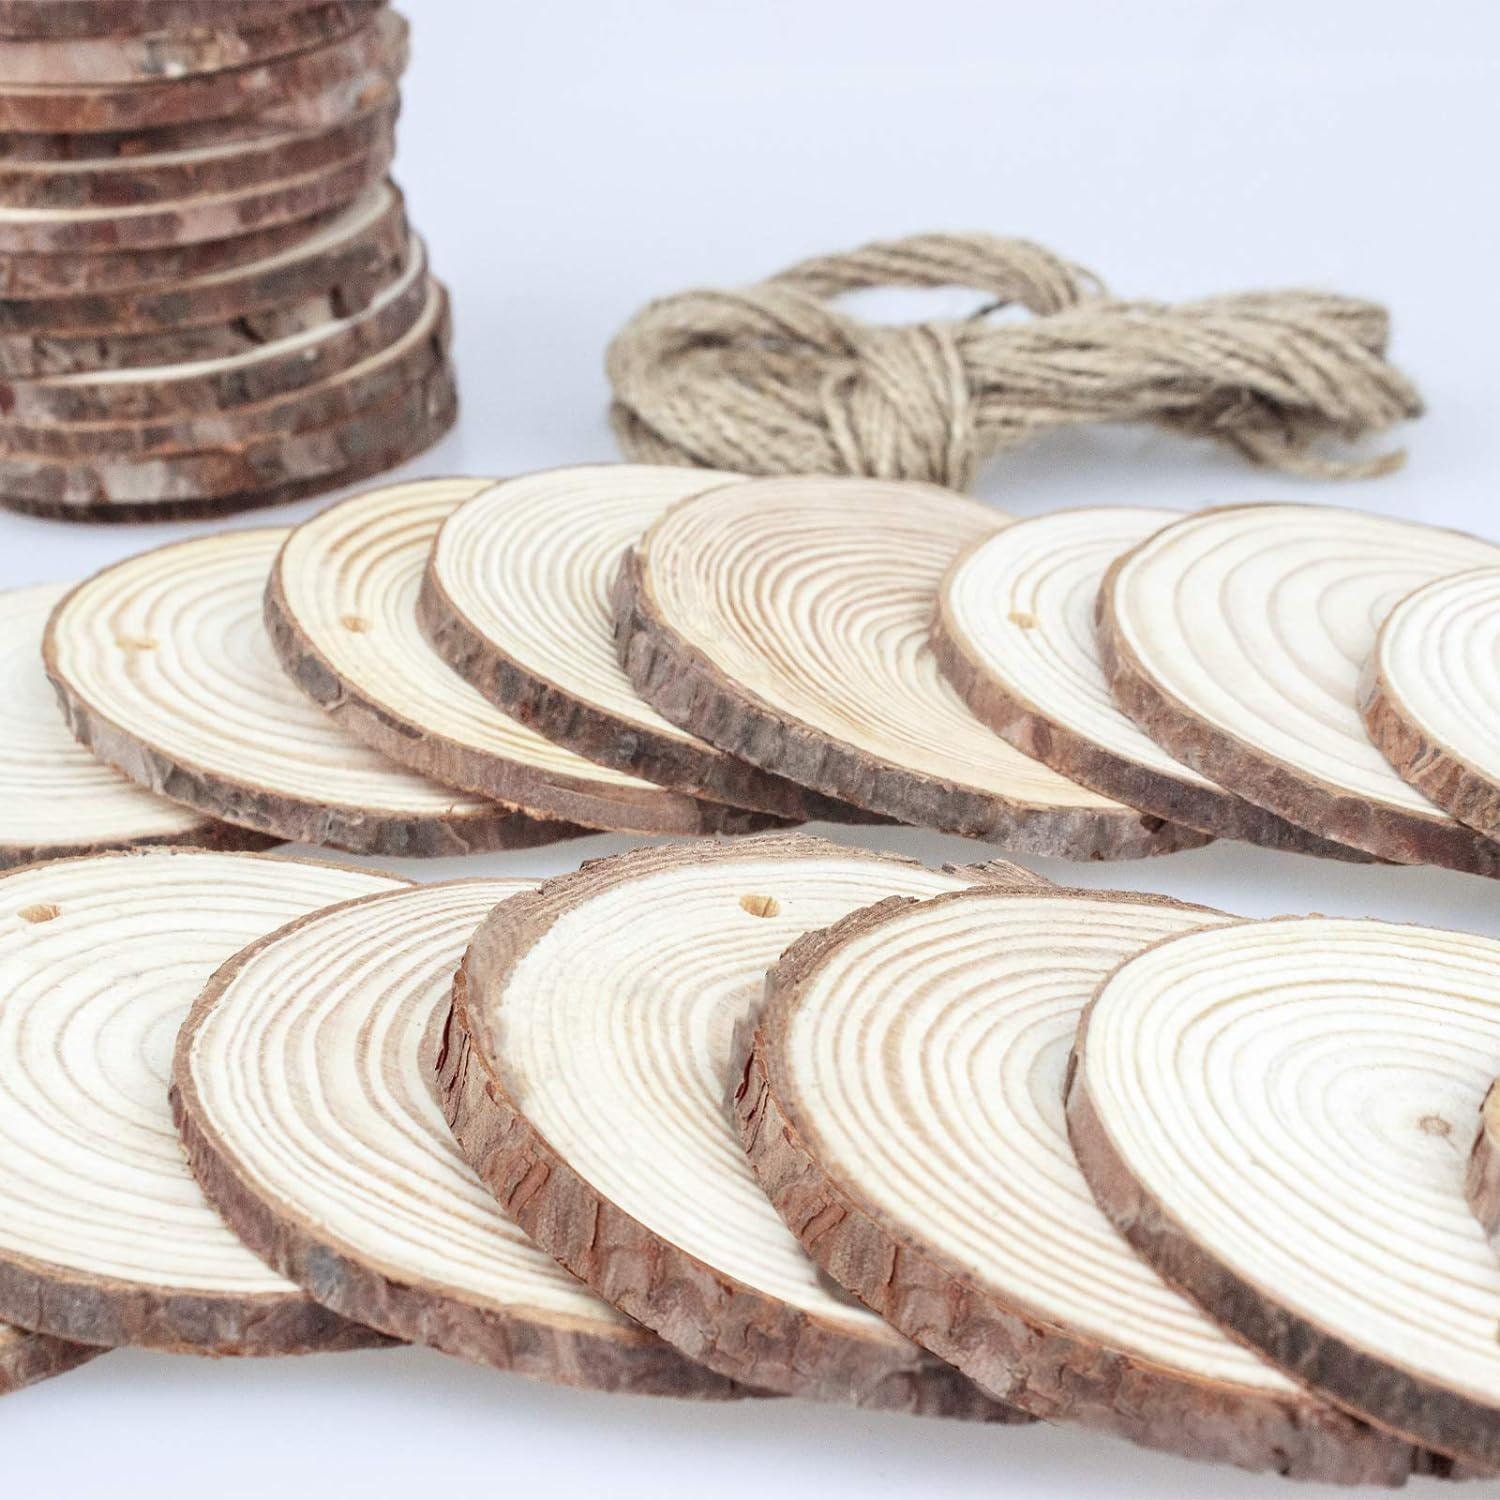 Binswloo 30 Pcs Natural Wood Slices, 3.5-4 Inch Unfinished Craft Wood  Circles Round Wood Discs for Arts DIY Crafts Paintings